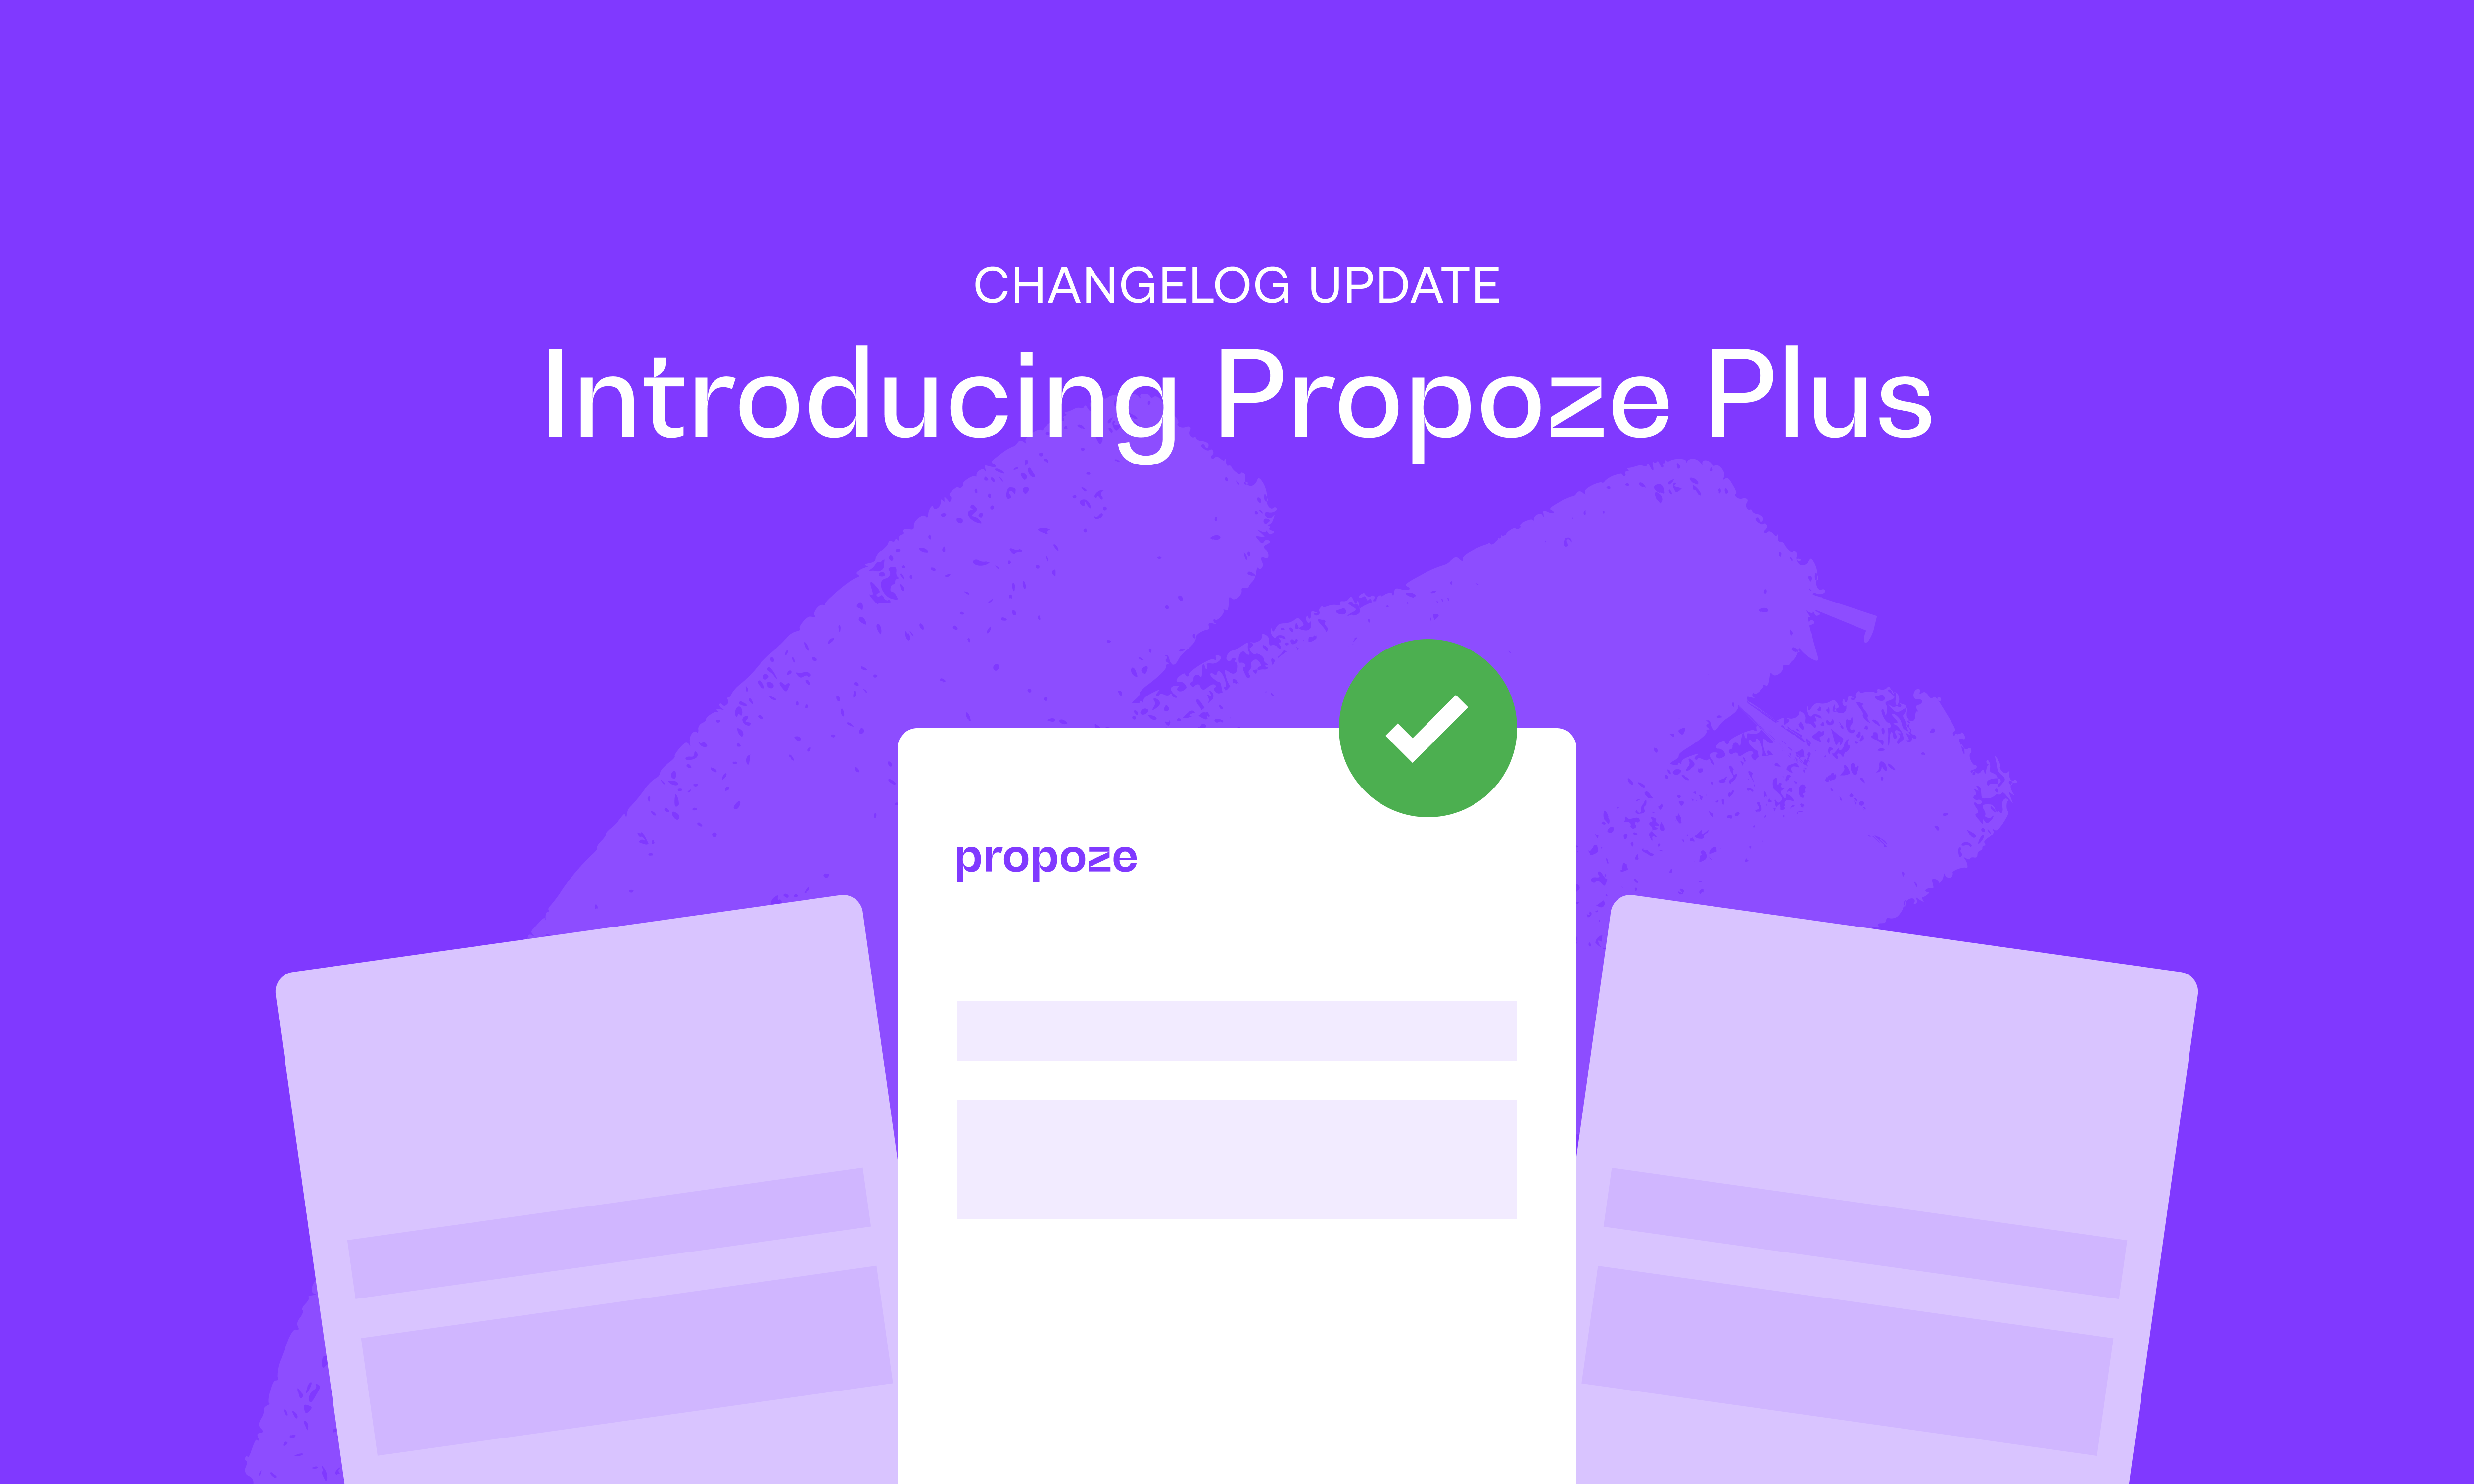 Propoze Plus has officially launched!